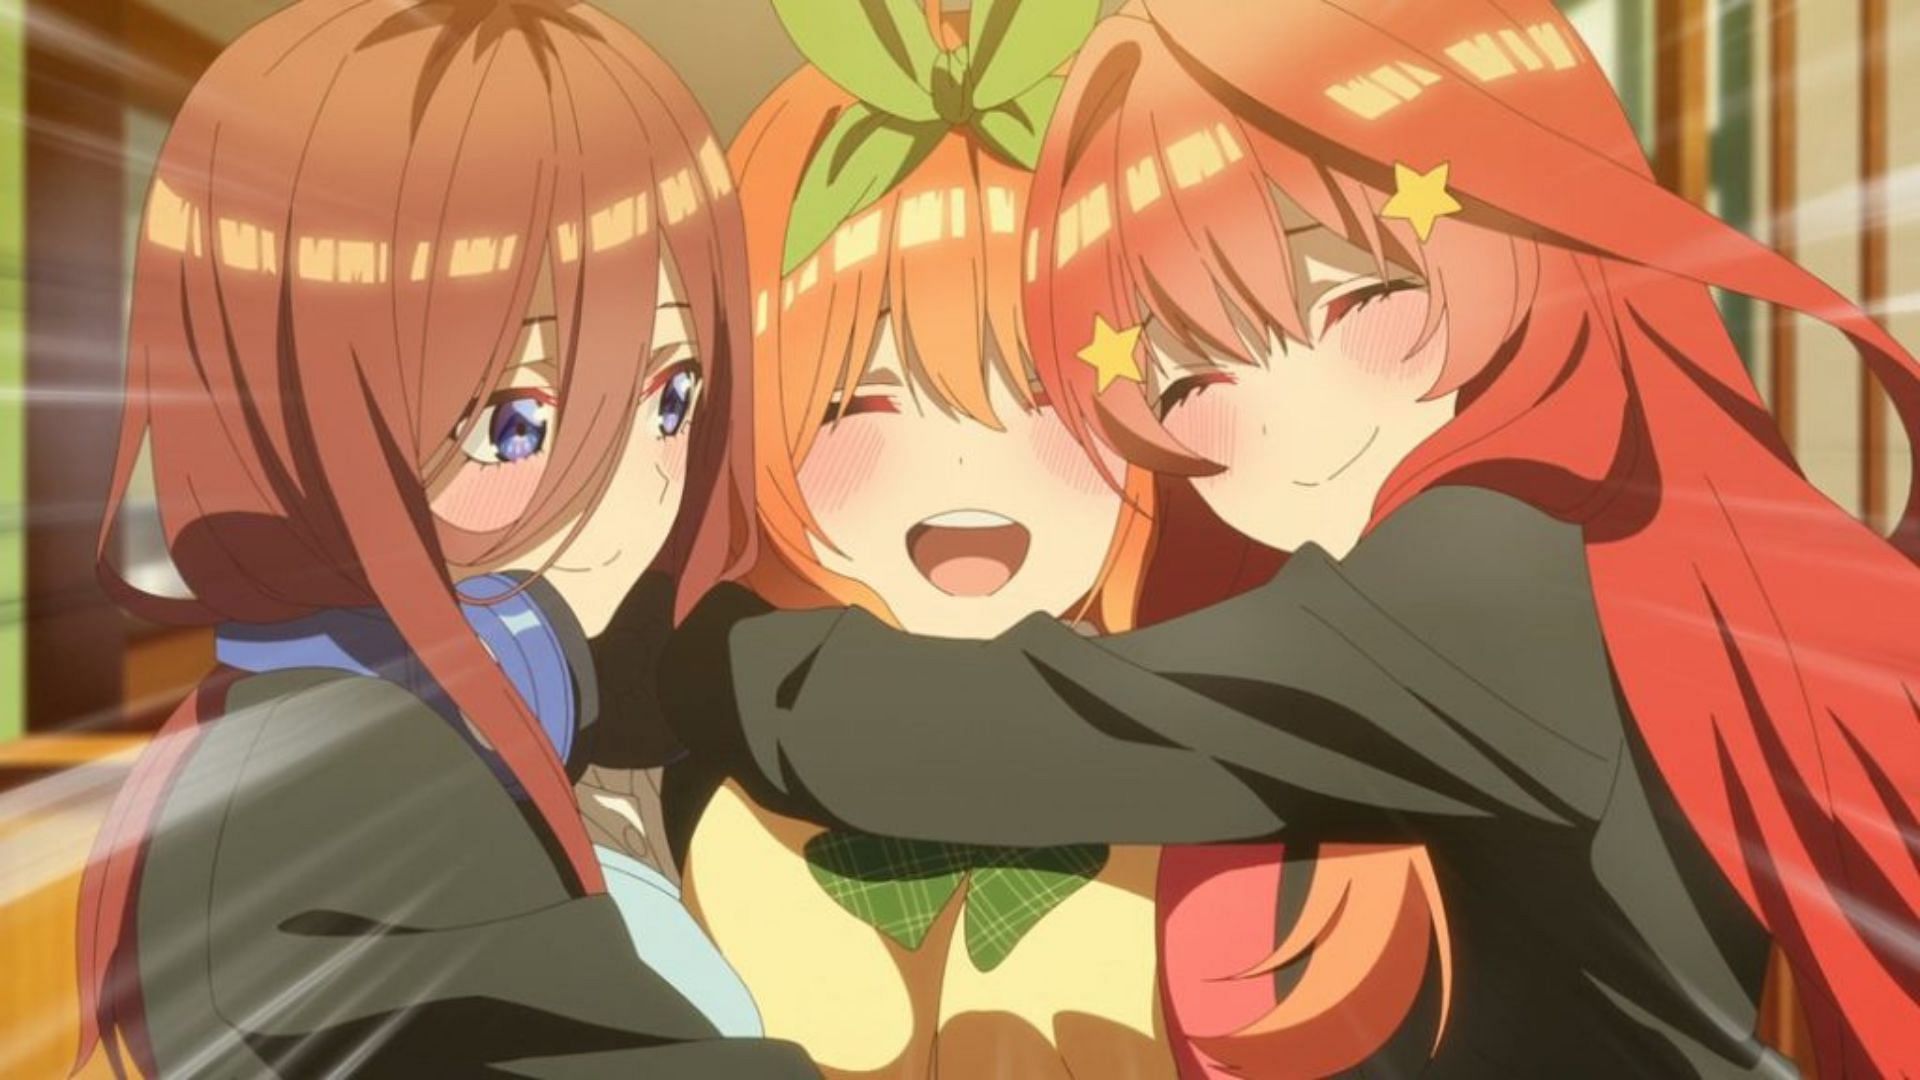 The Quintessential Quintuplets to Continue with 2022 Movie